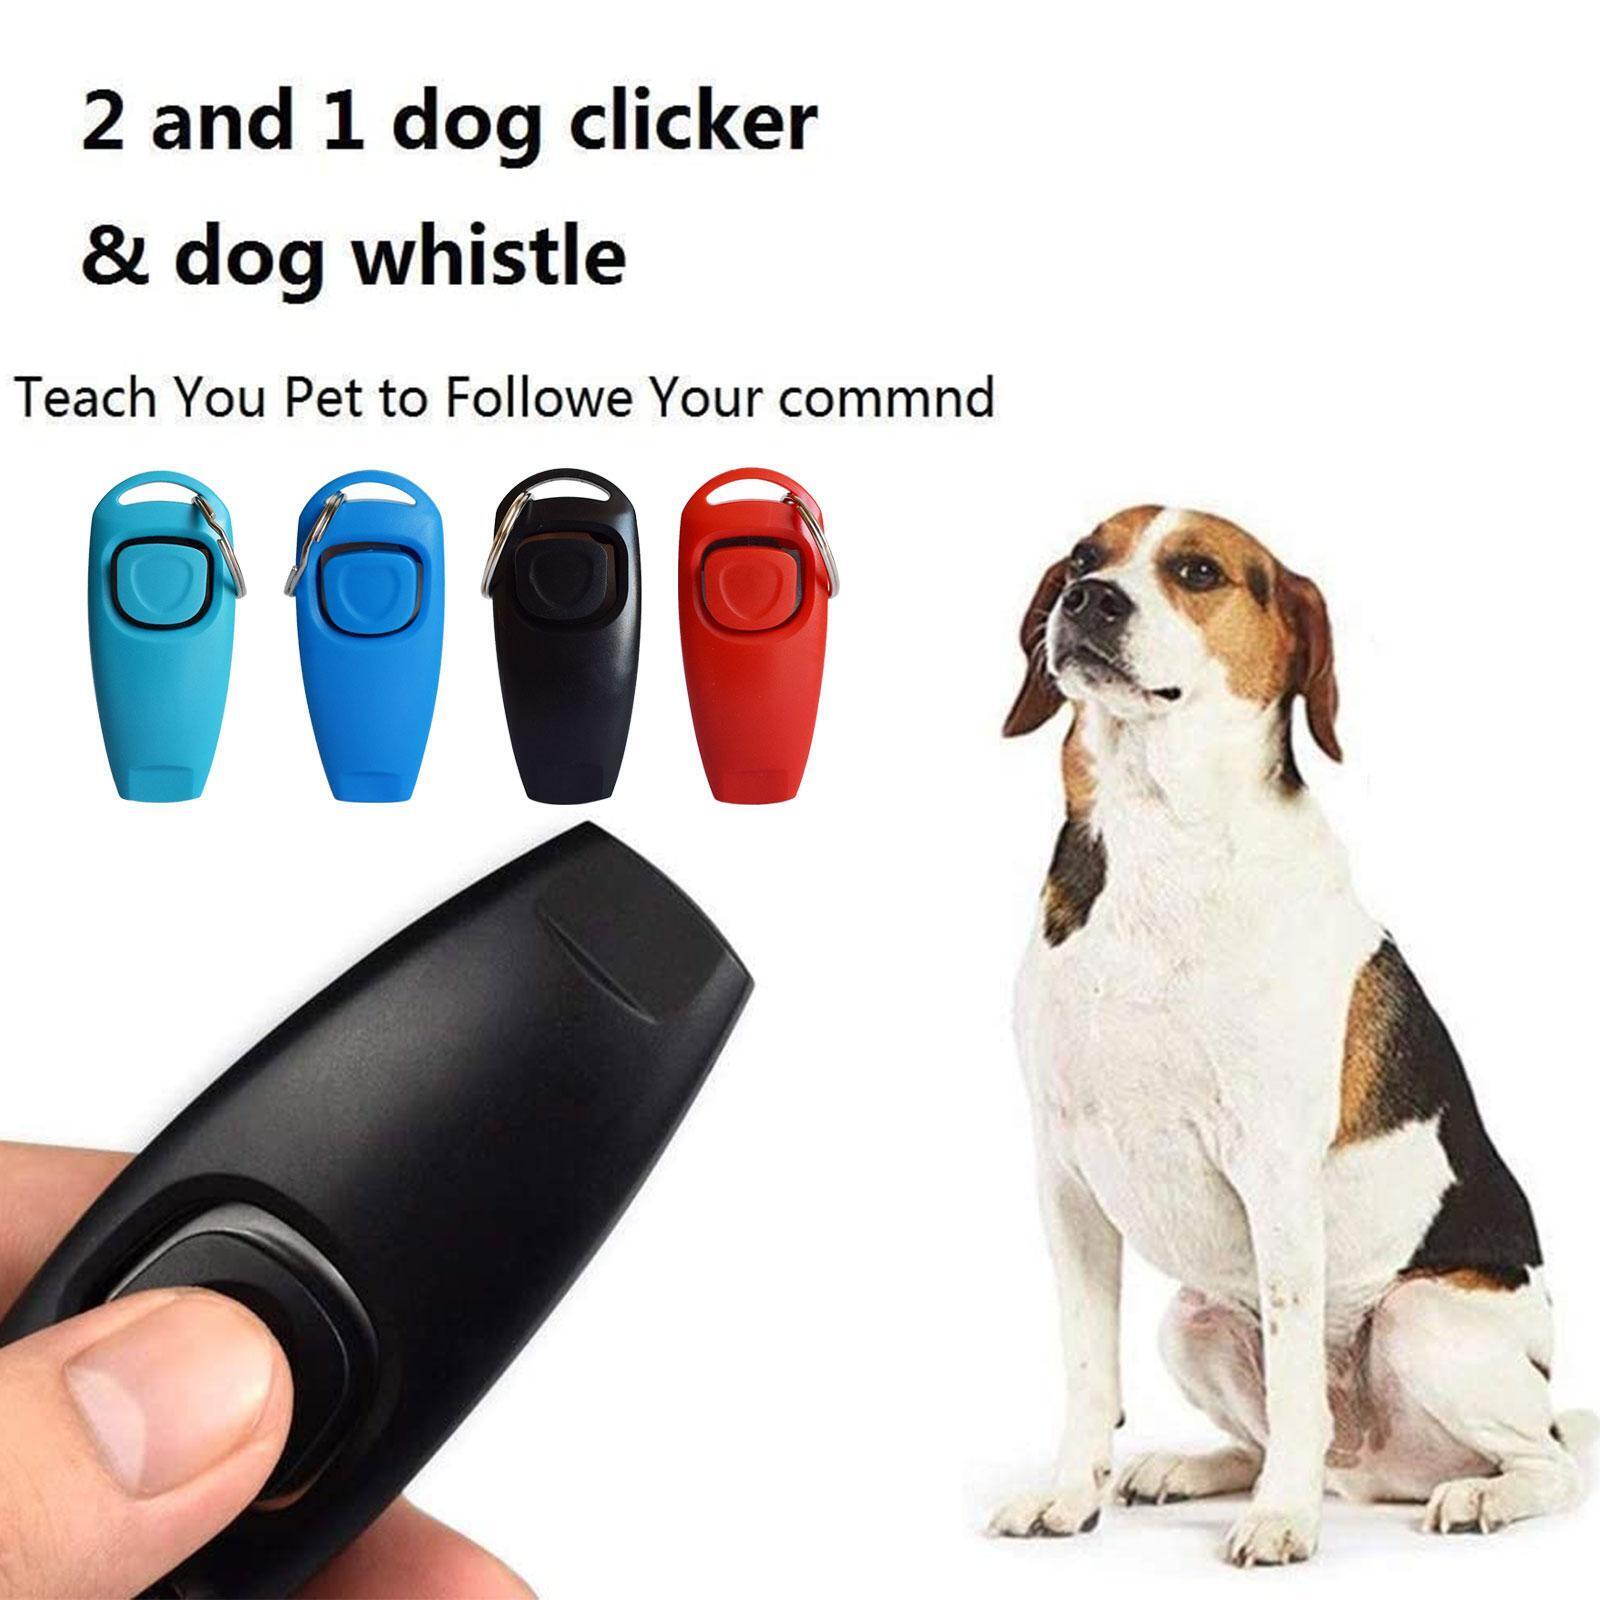 Pet Dog Training Whistle Clicker Pet Trainer Click Aid Guide Puppy US P5X3